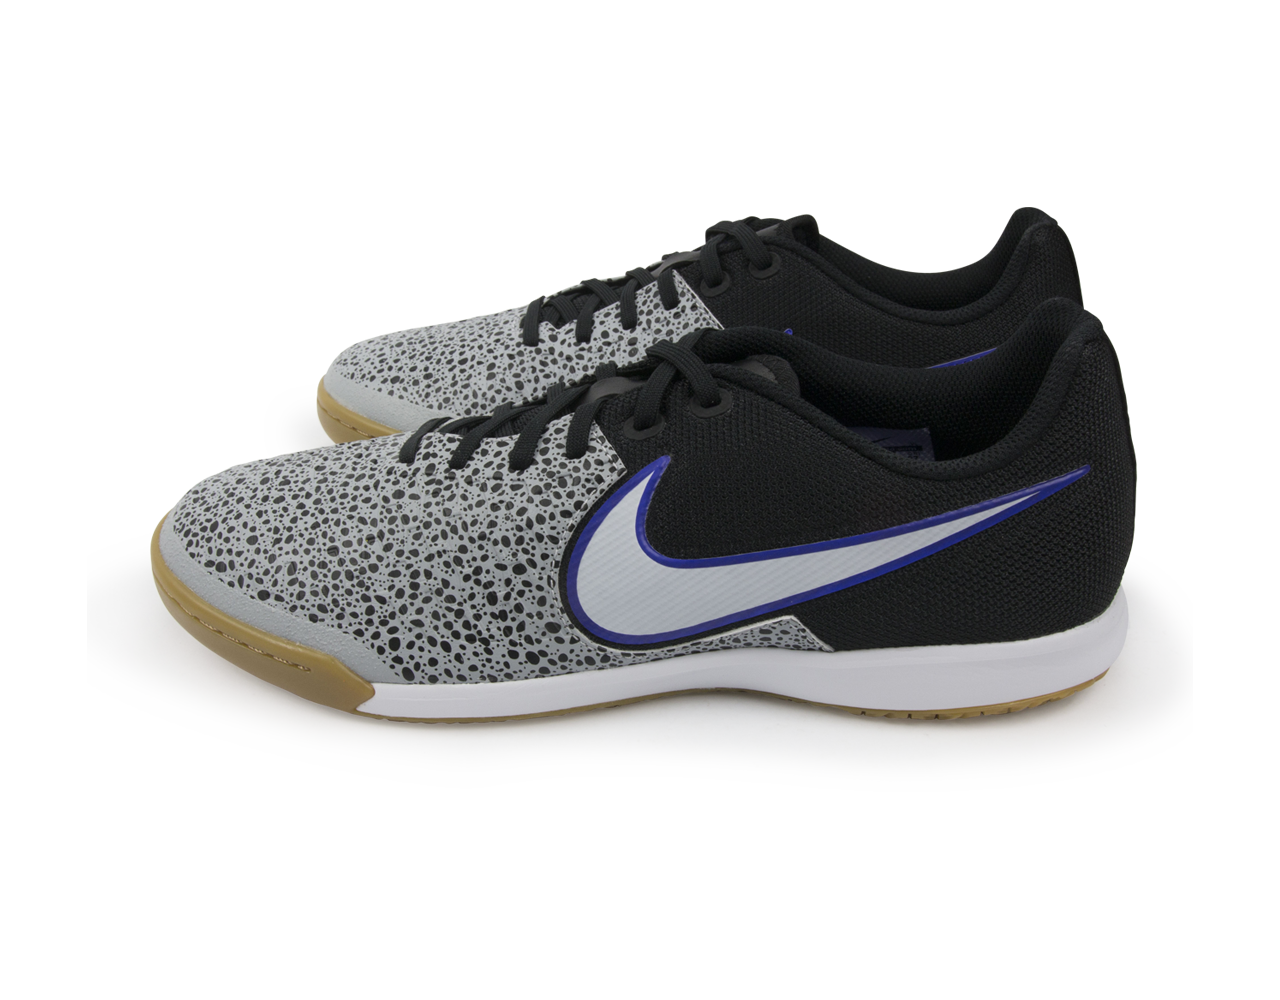 Nike Men's MagistaX Pro Indoor Soccer Shoes Wolf Grey/White/Black